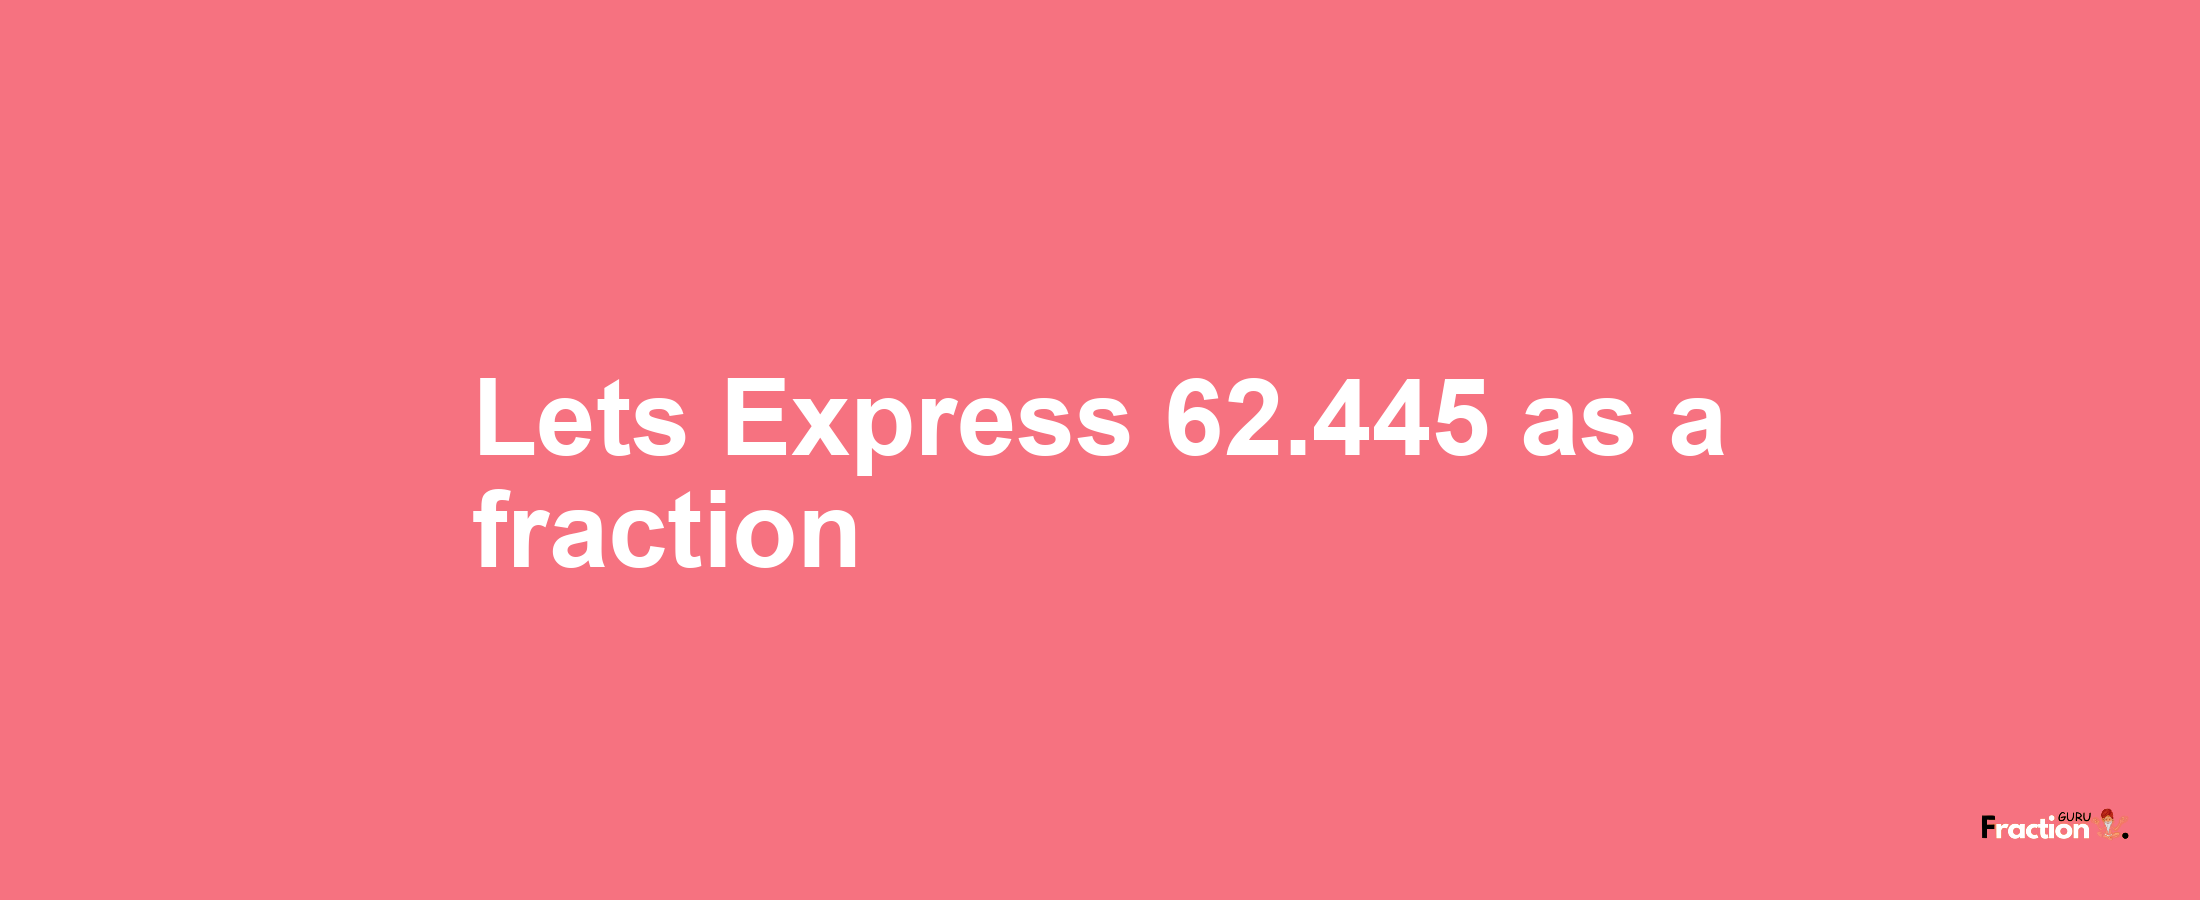 Lets Express 62.445 as afraction